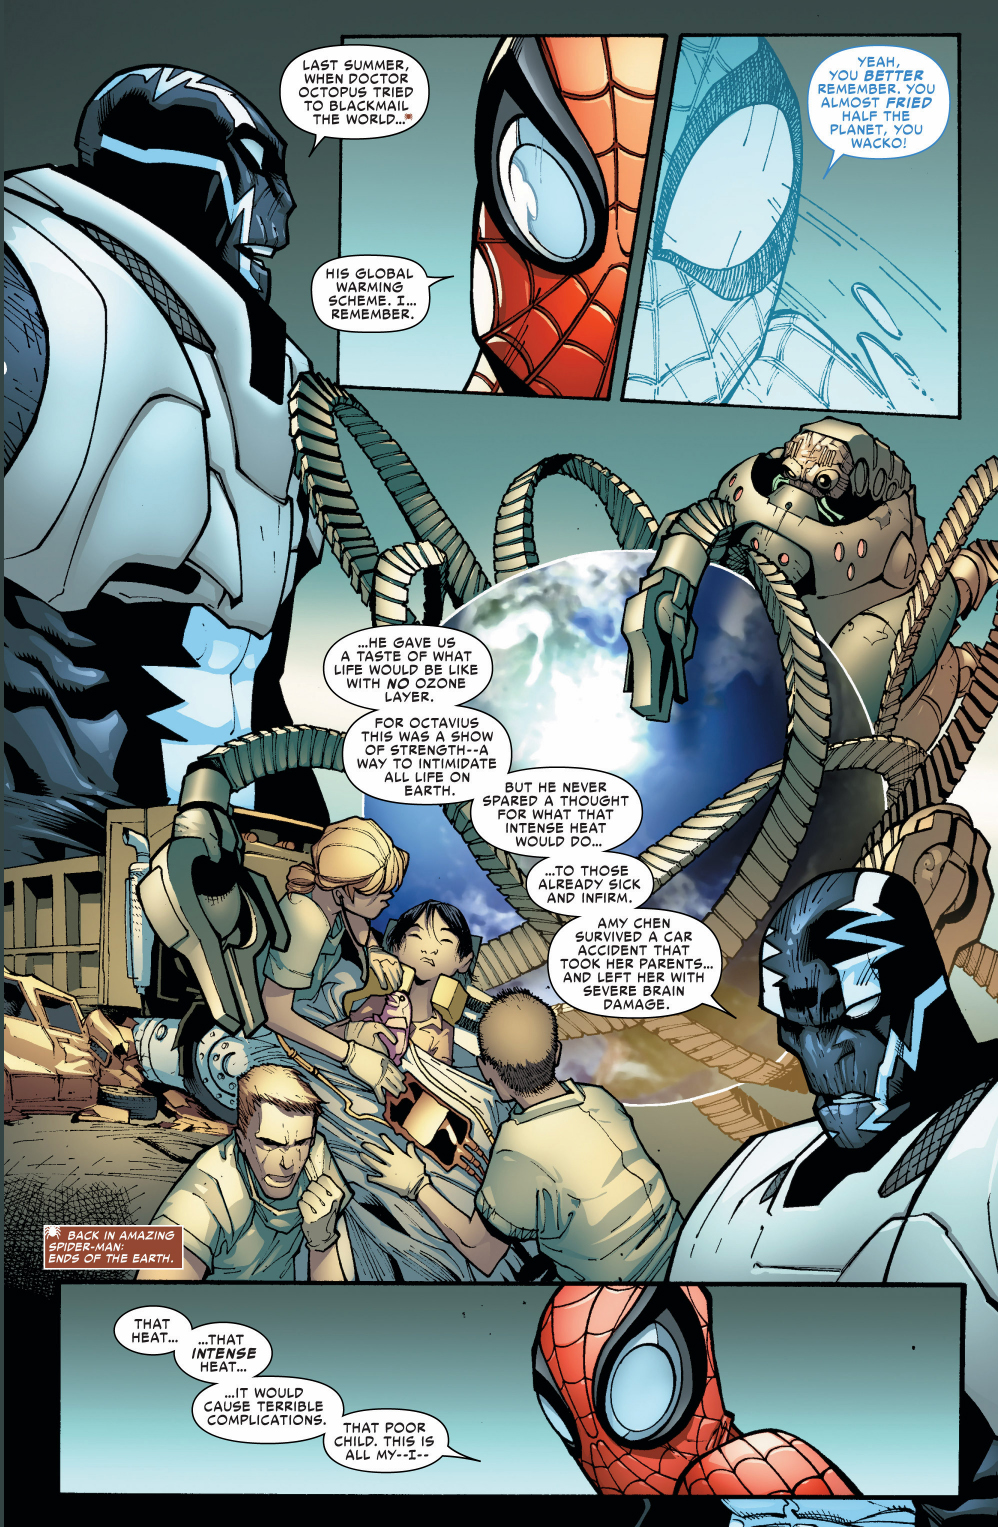 superior spider-man performs surgery